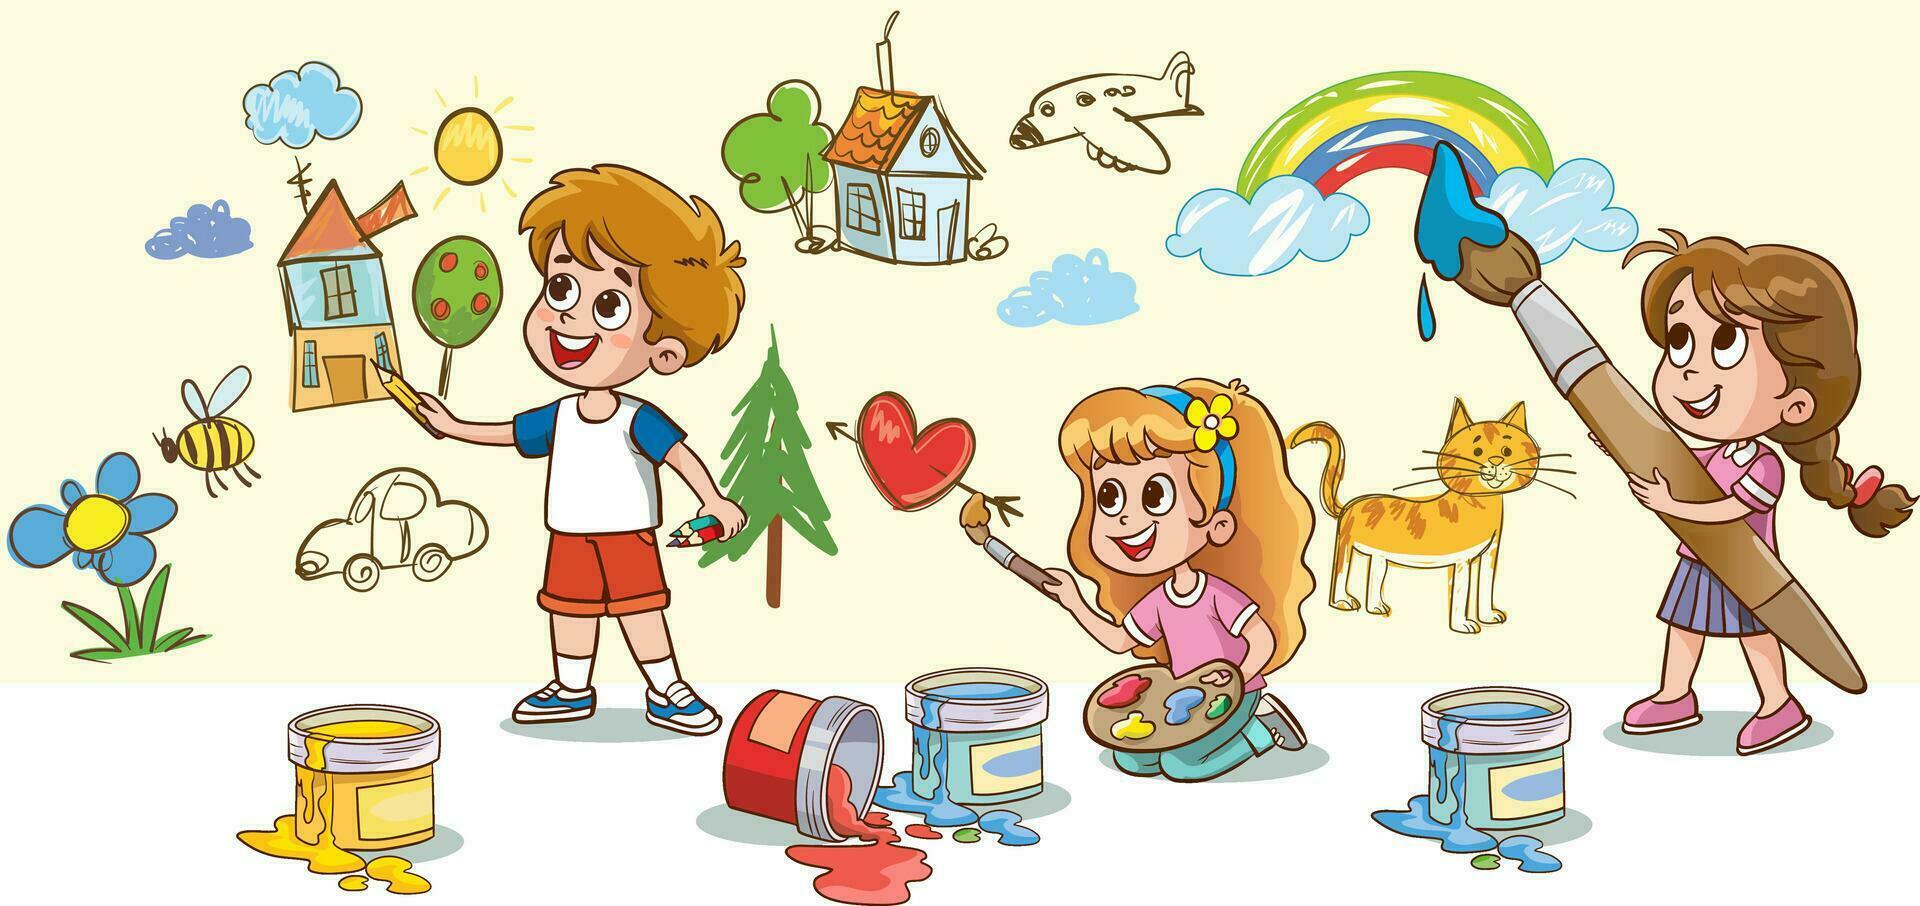 Kindergarten. Boys and girls drawing picture doodles on the walls. Children draw with felt tip, paints and crayons. vector